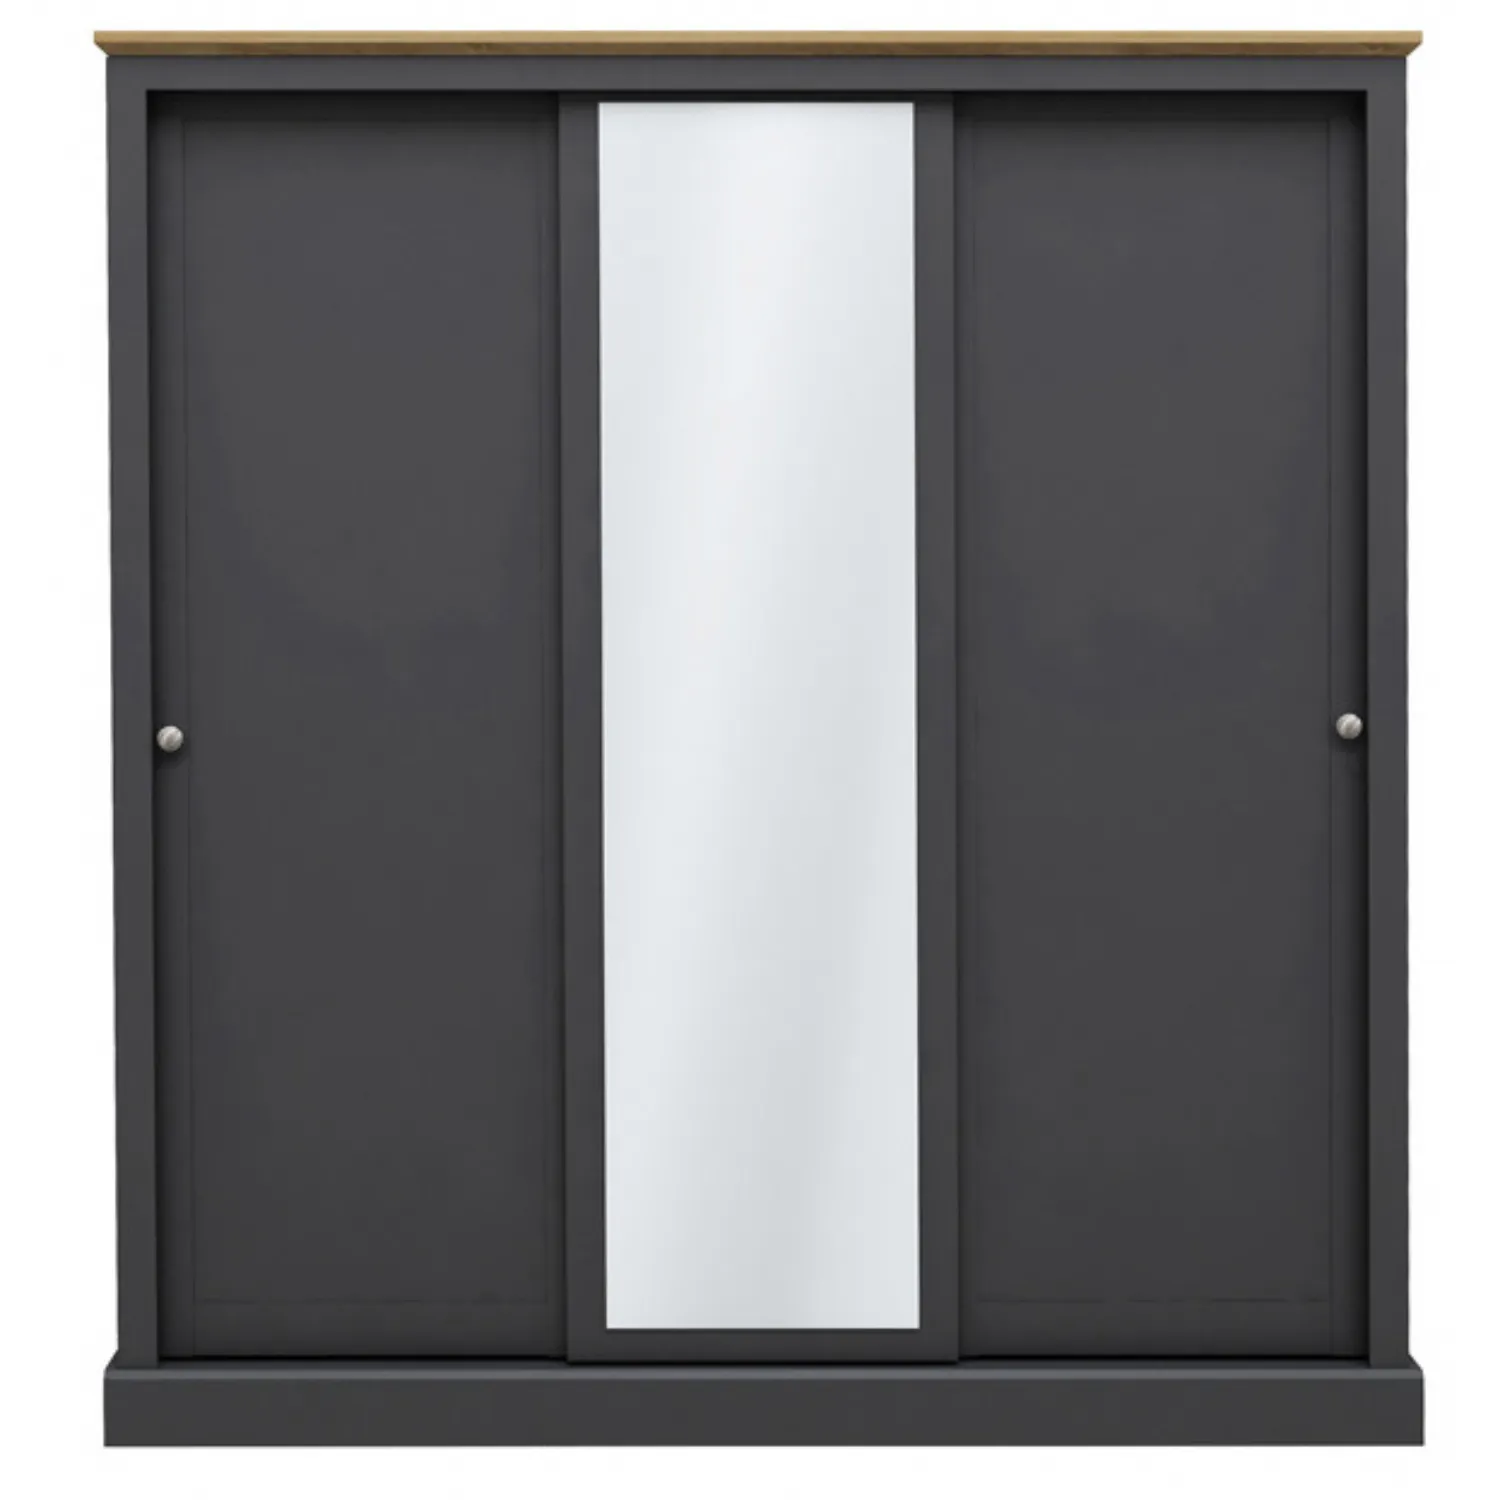 Charcoal Painted 3 Door Sliding Wardrobe Oak Effect Top with Centre Mirror 182x176cm